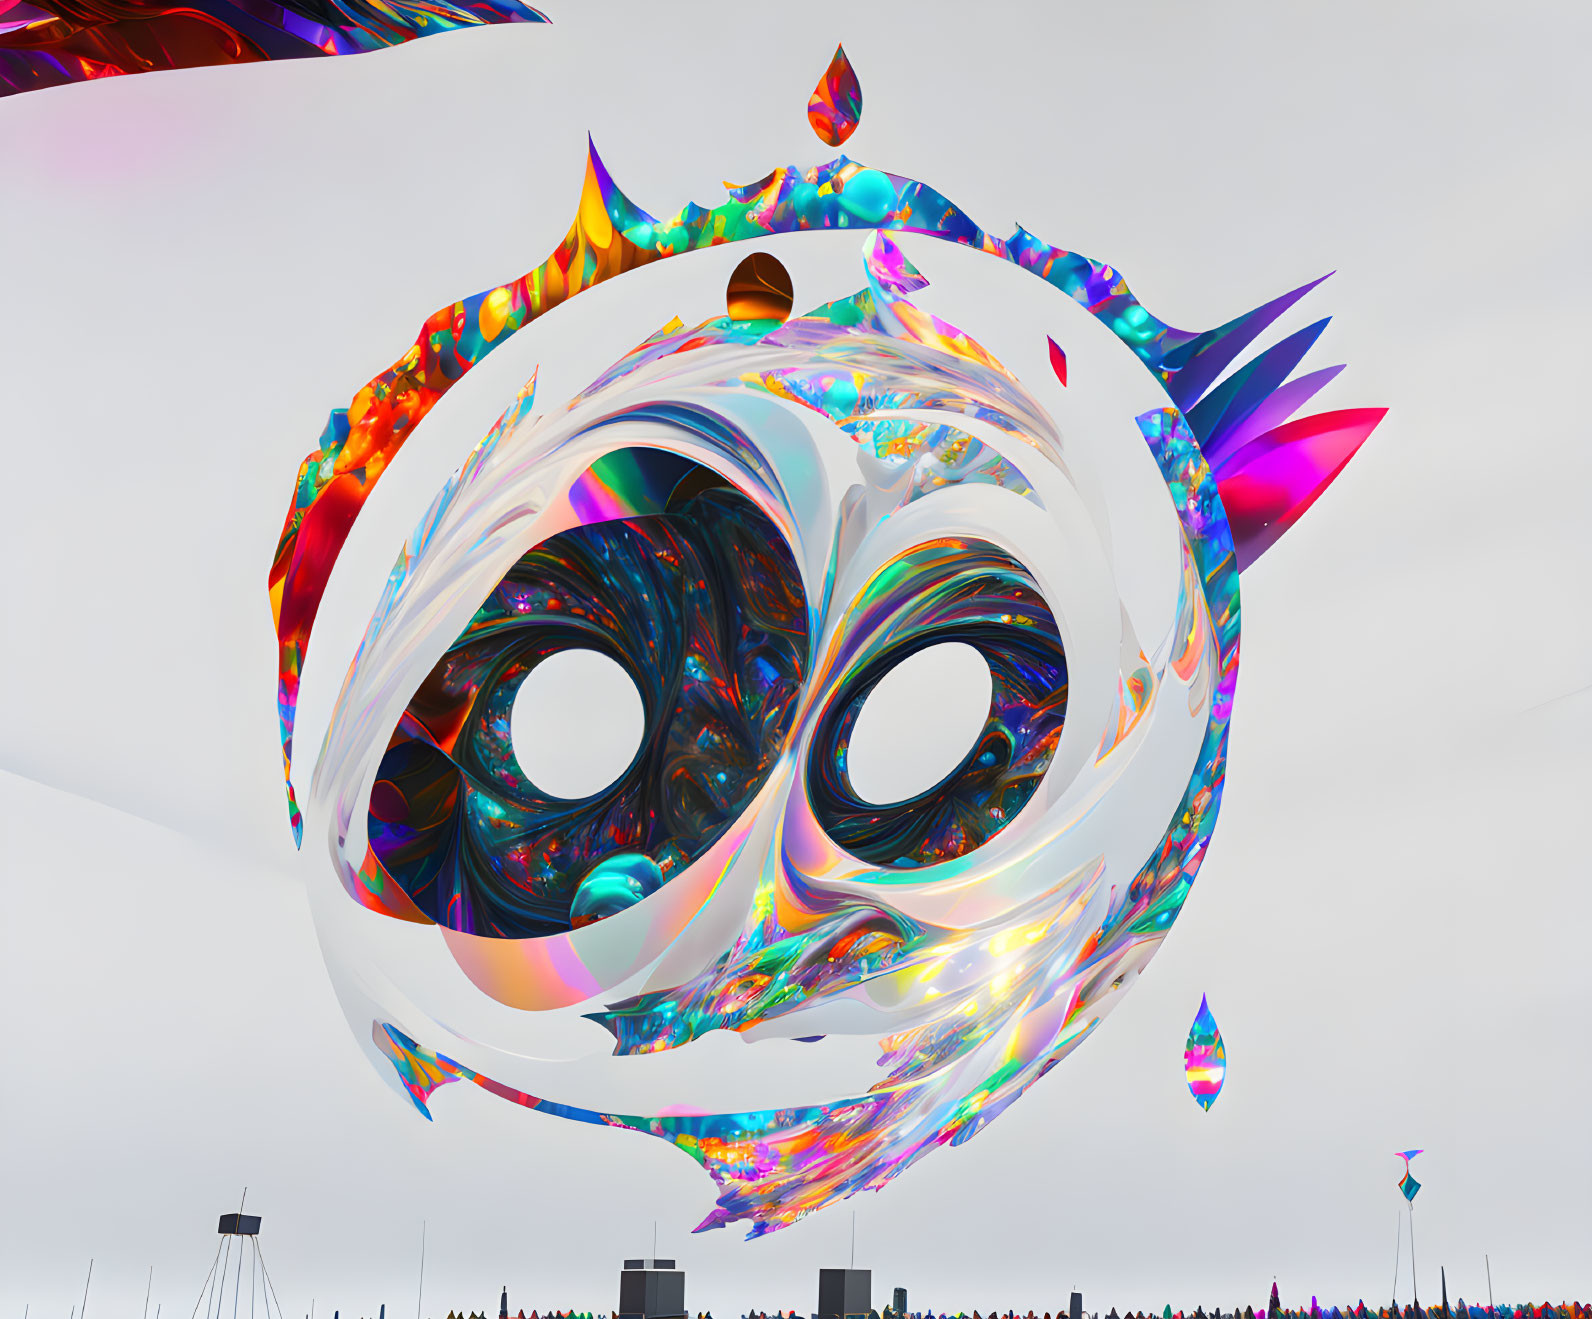 Colorful Abstract Digital Artwork with Swirling Eye-like Shapes